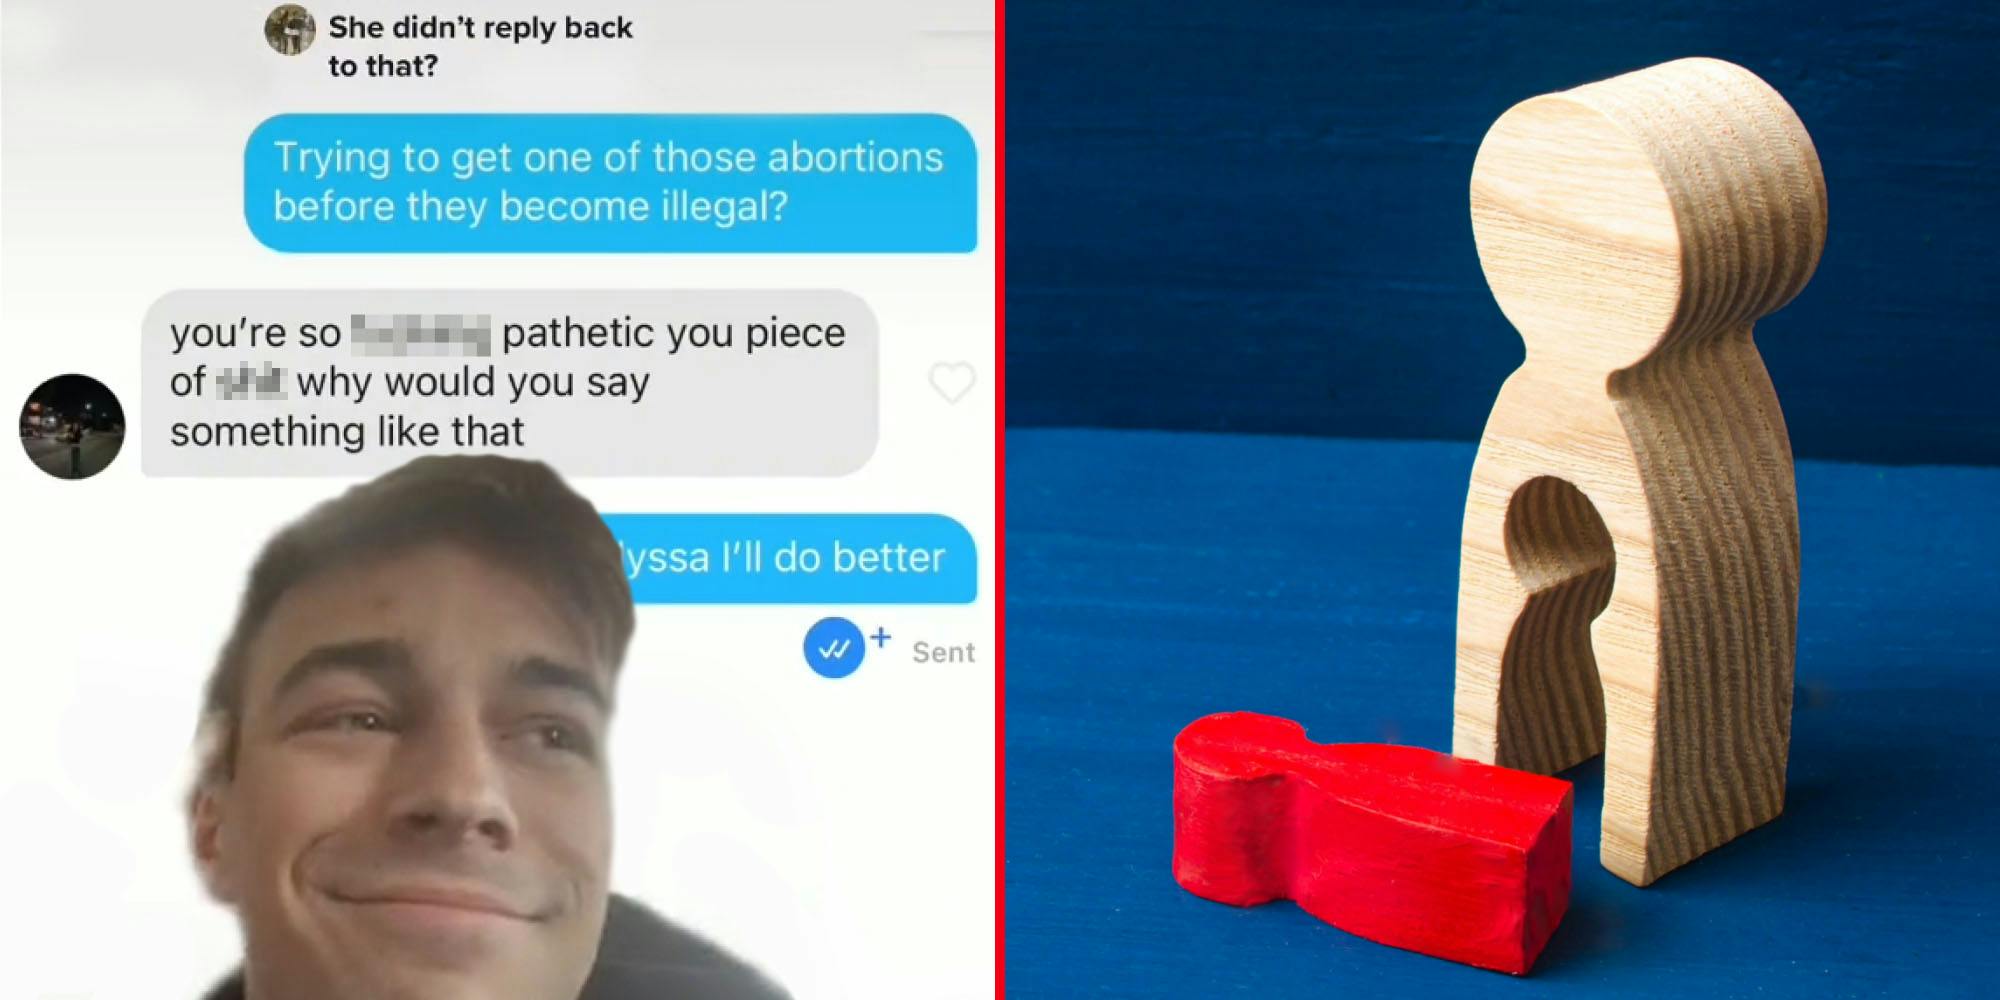 man tiktok greenscreen smirking over text messages caption "She didn't reply back to that?" "Trying to get one of those abortions before they become illegal right?" "you're so blank pathetic you piece of blank why would you say something like that" "I'll do better" (l) Wooden person shape with smaller person shape falling out onto table on blue background (insinuating losing a baby)